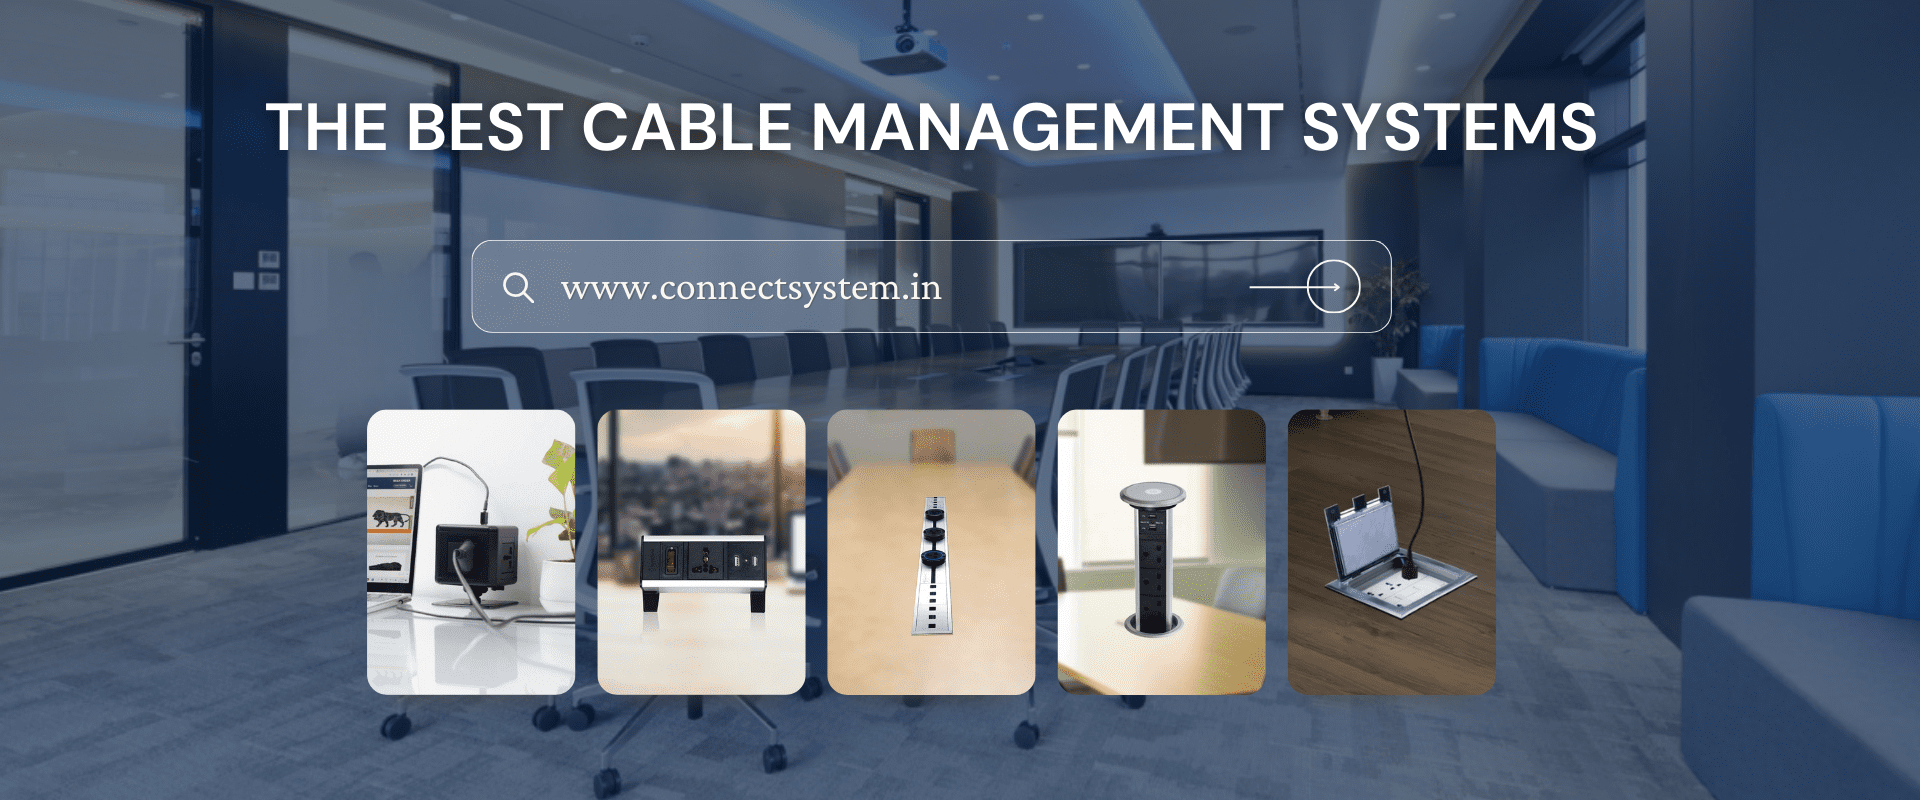 The Best Cable Management Systems